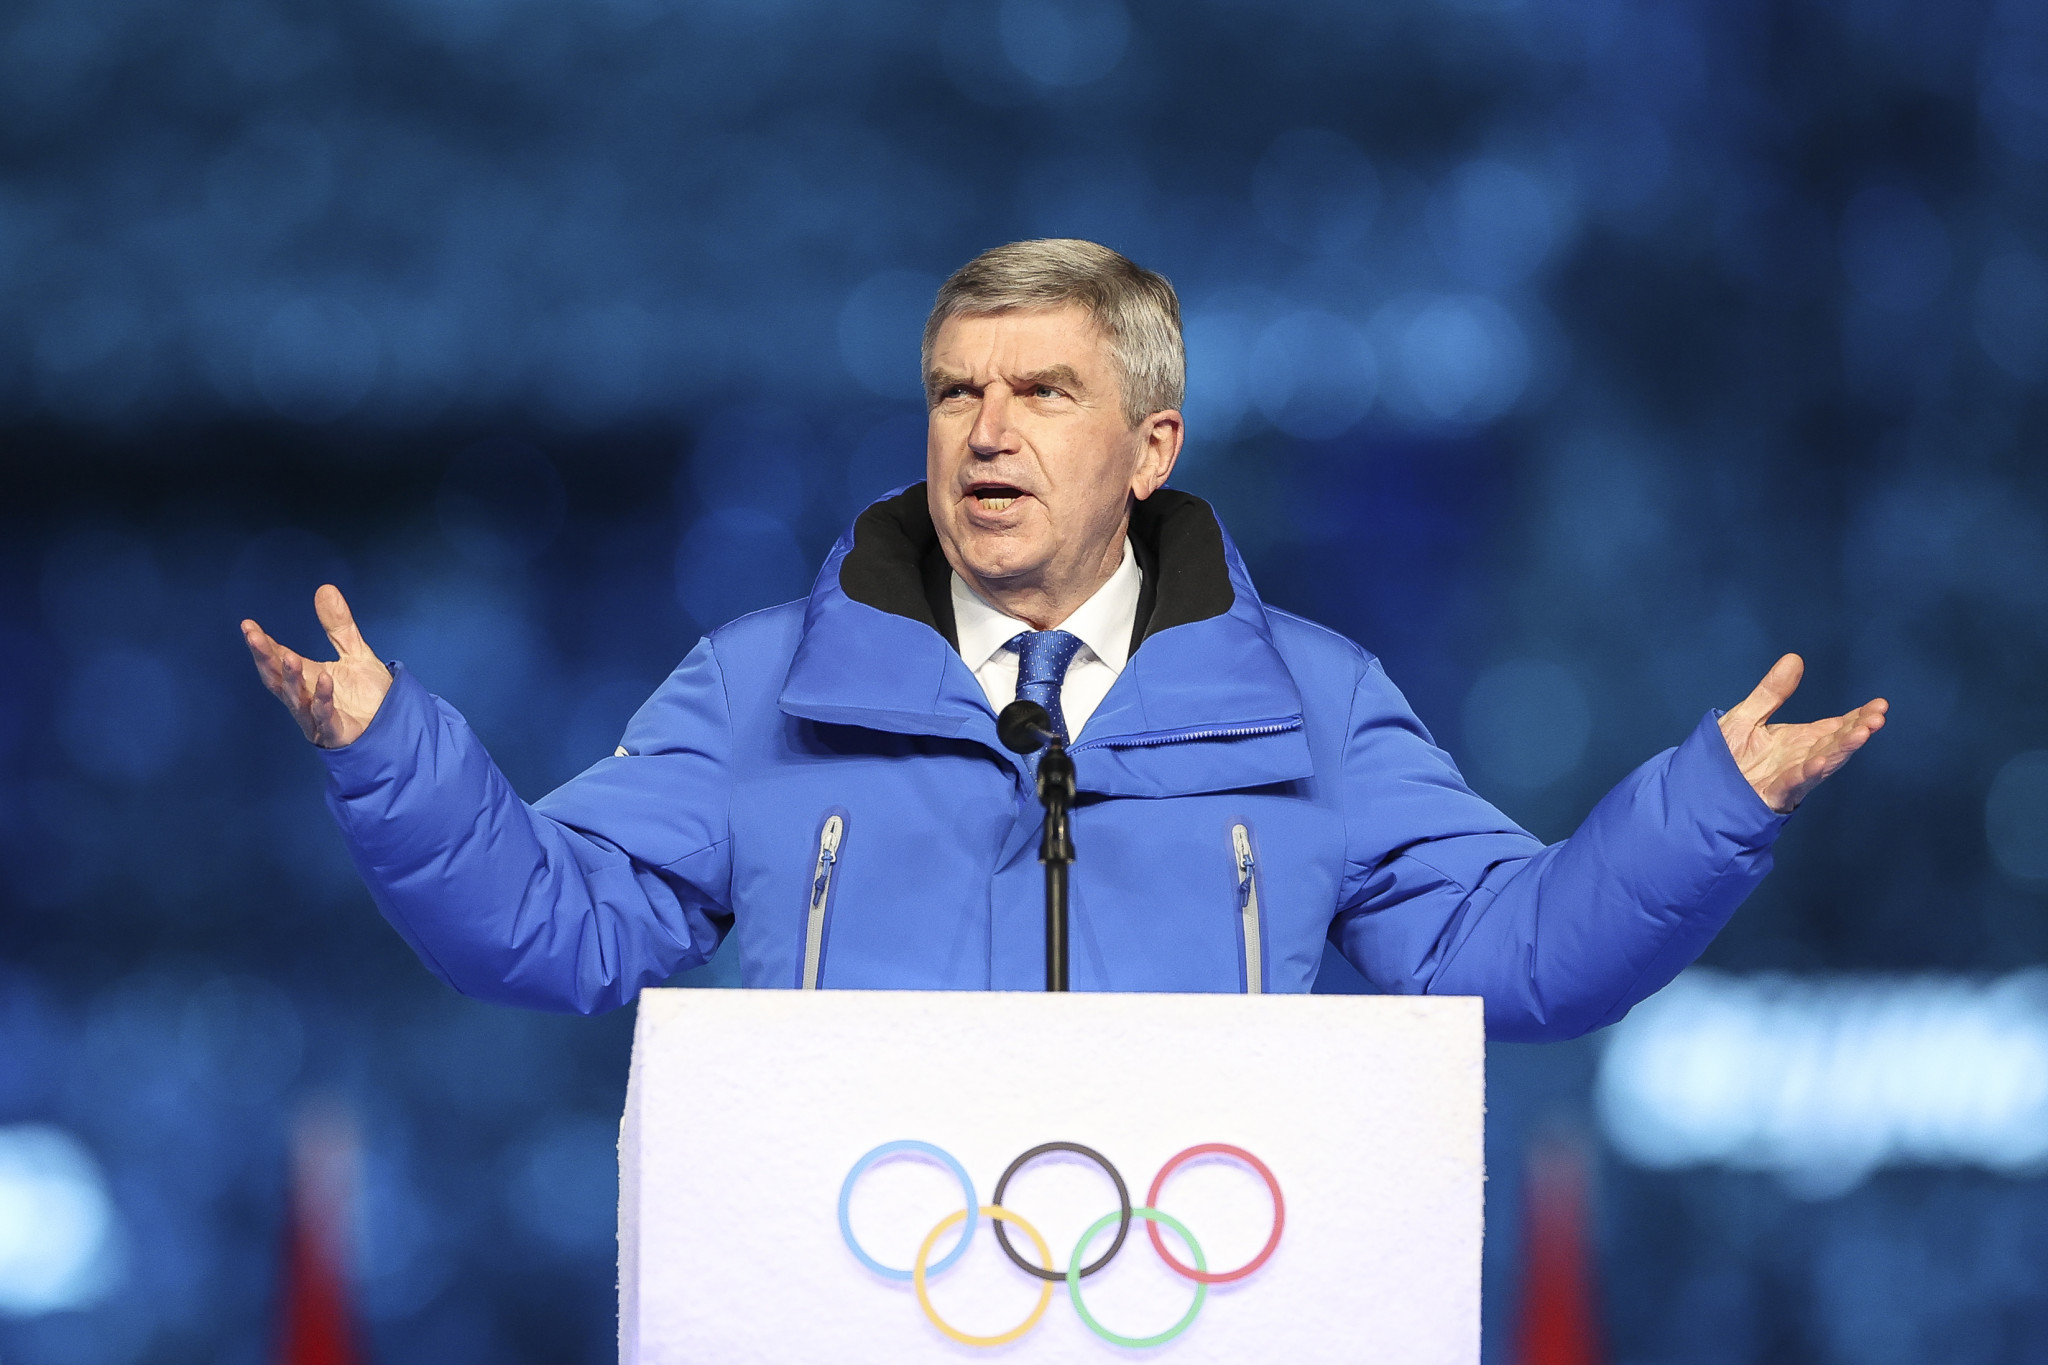 IOC President Bach to attend Opening Ceremony of Birmingham World Games in July